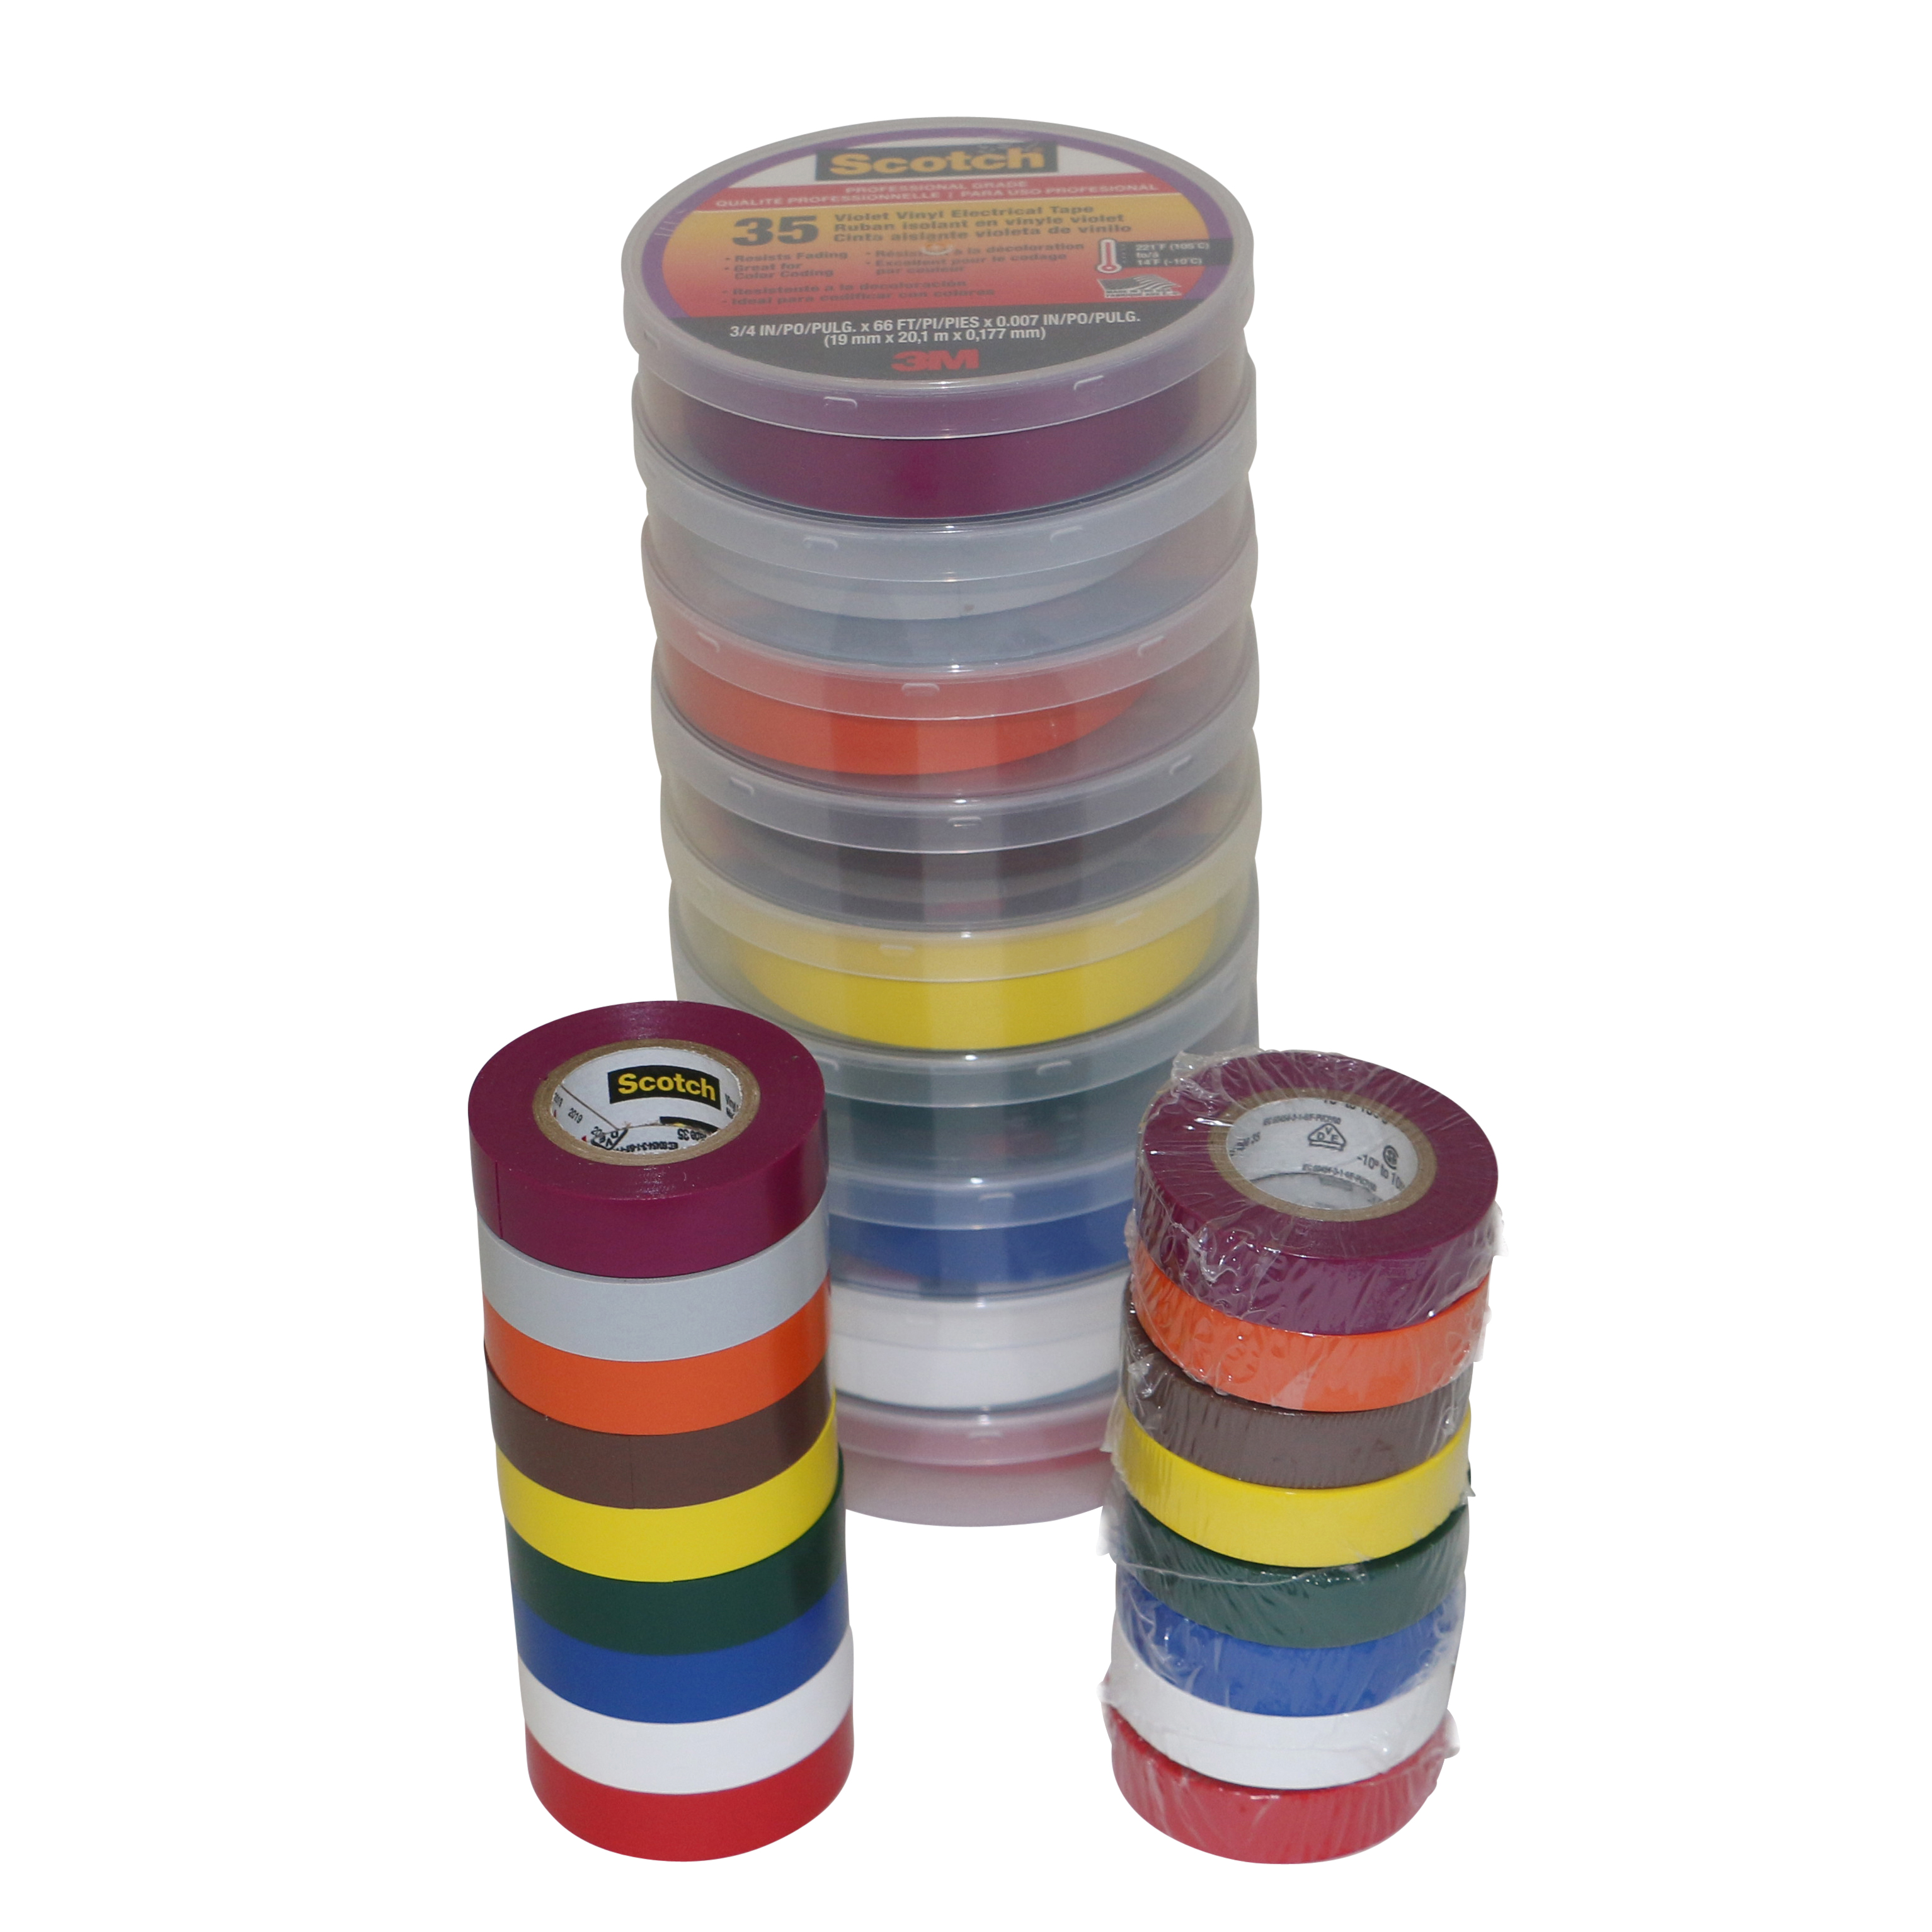 Tape general purpose electrical tape 3/4" x 66 Ft 10 rolls multicolor 